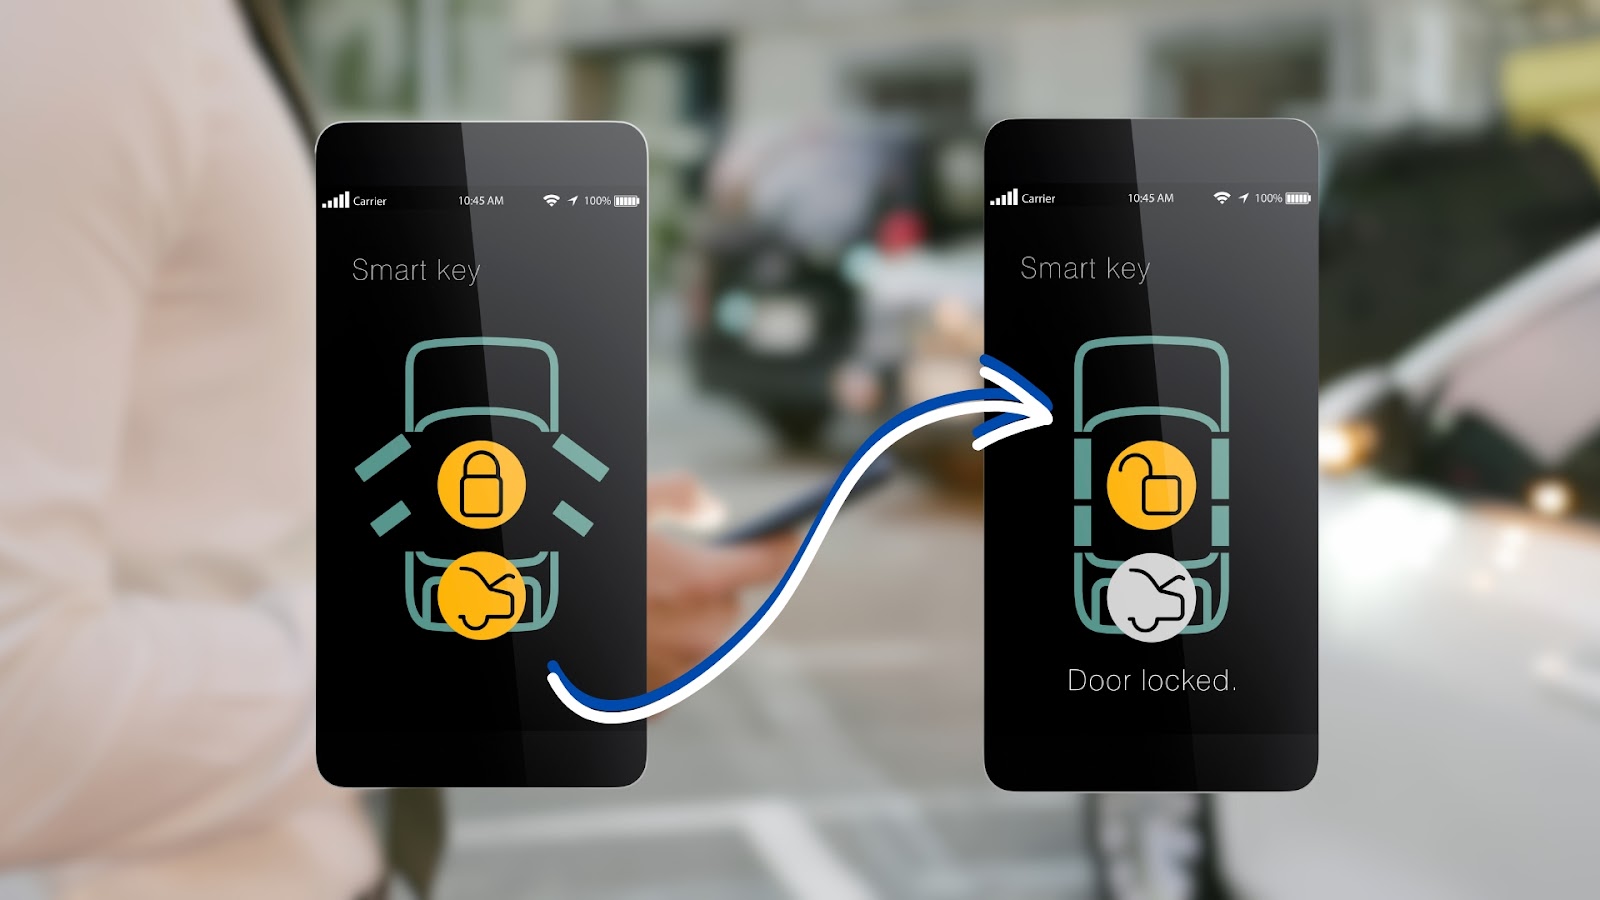 A smart car key being managed using the smartphone